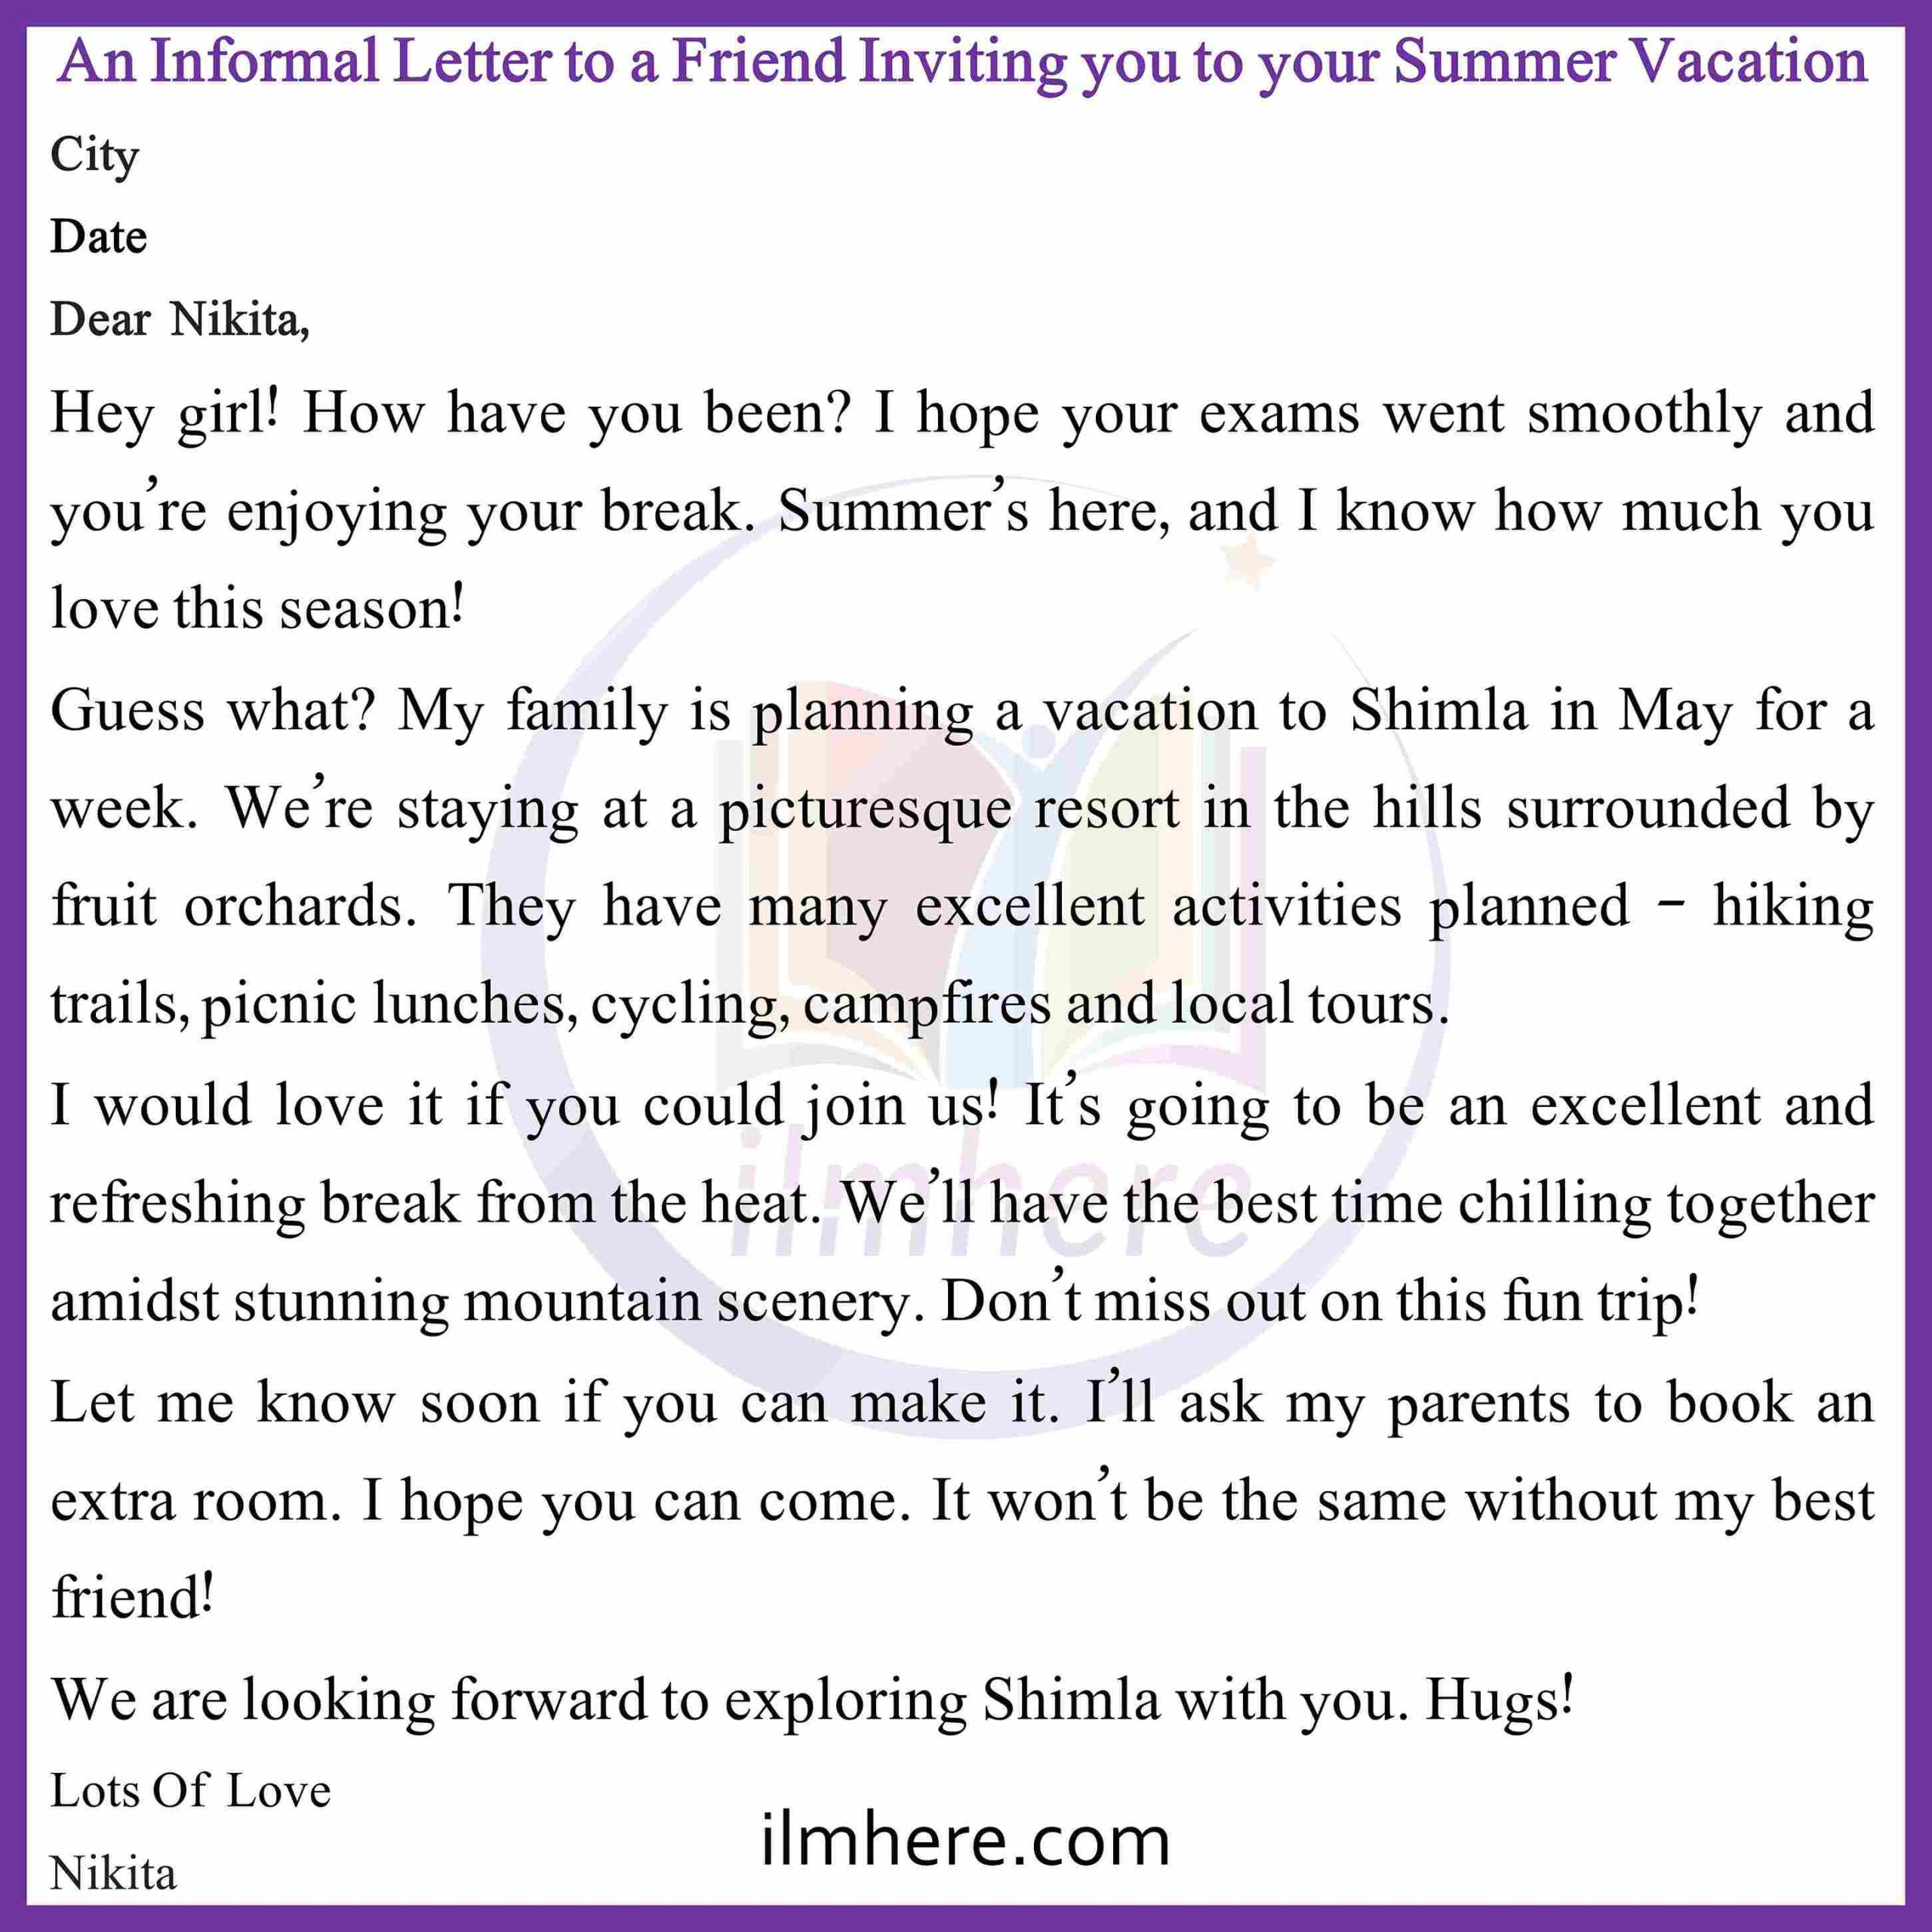 How to write an Informal Letter to a Friend Inviting you to your Summer Vacation